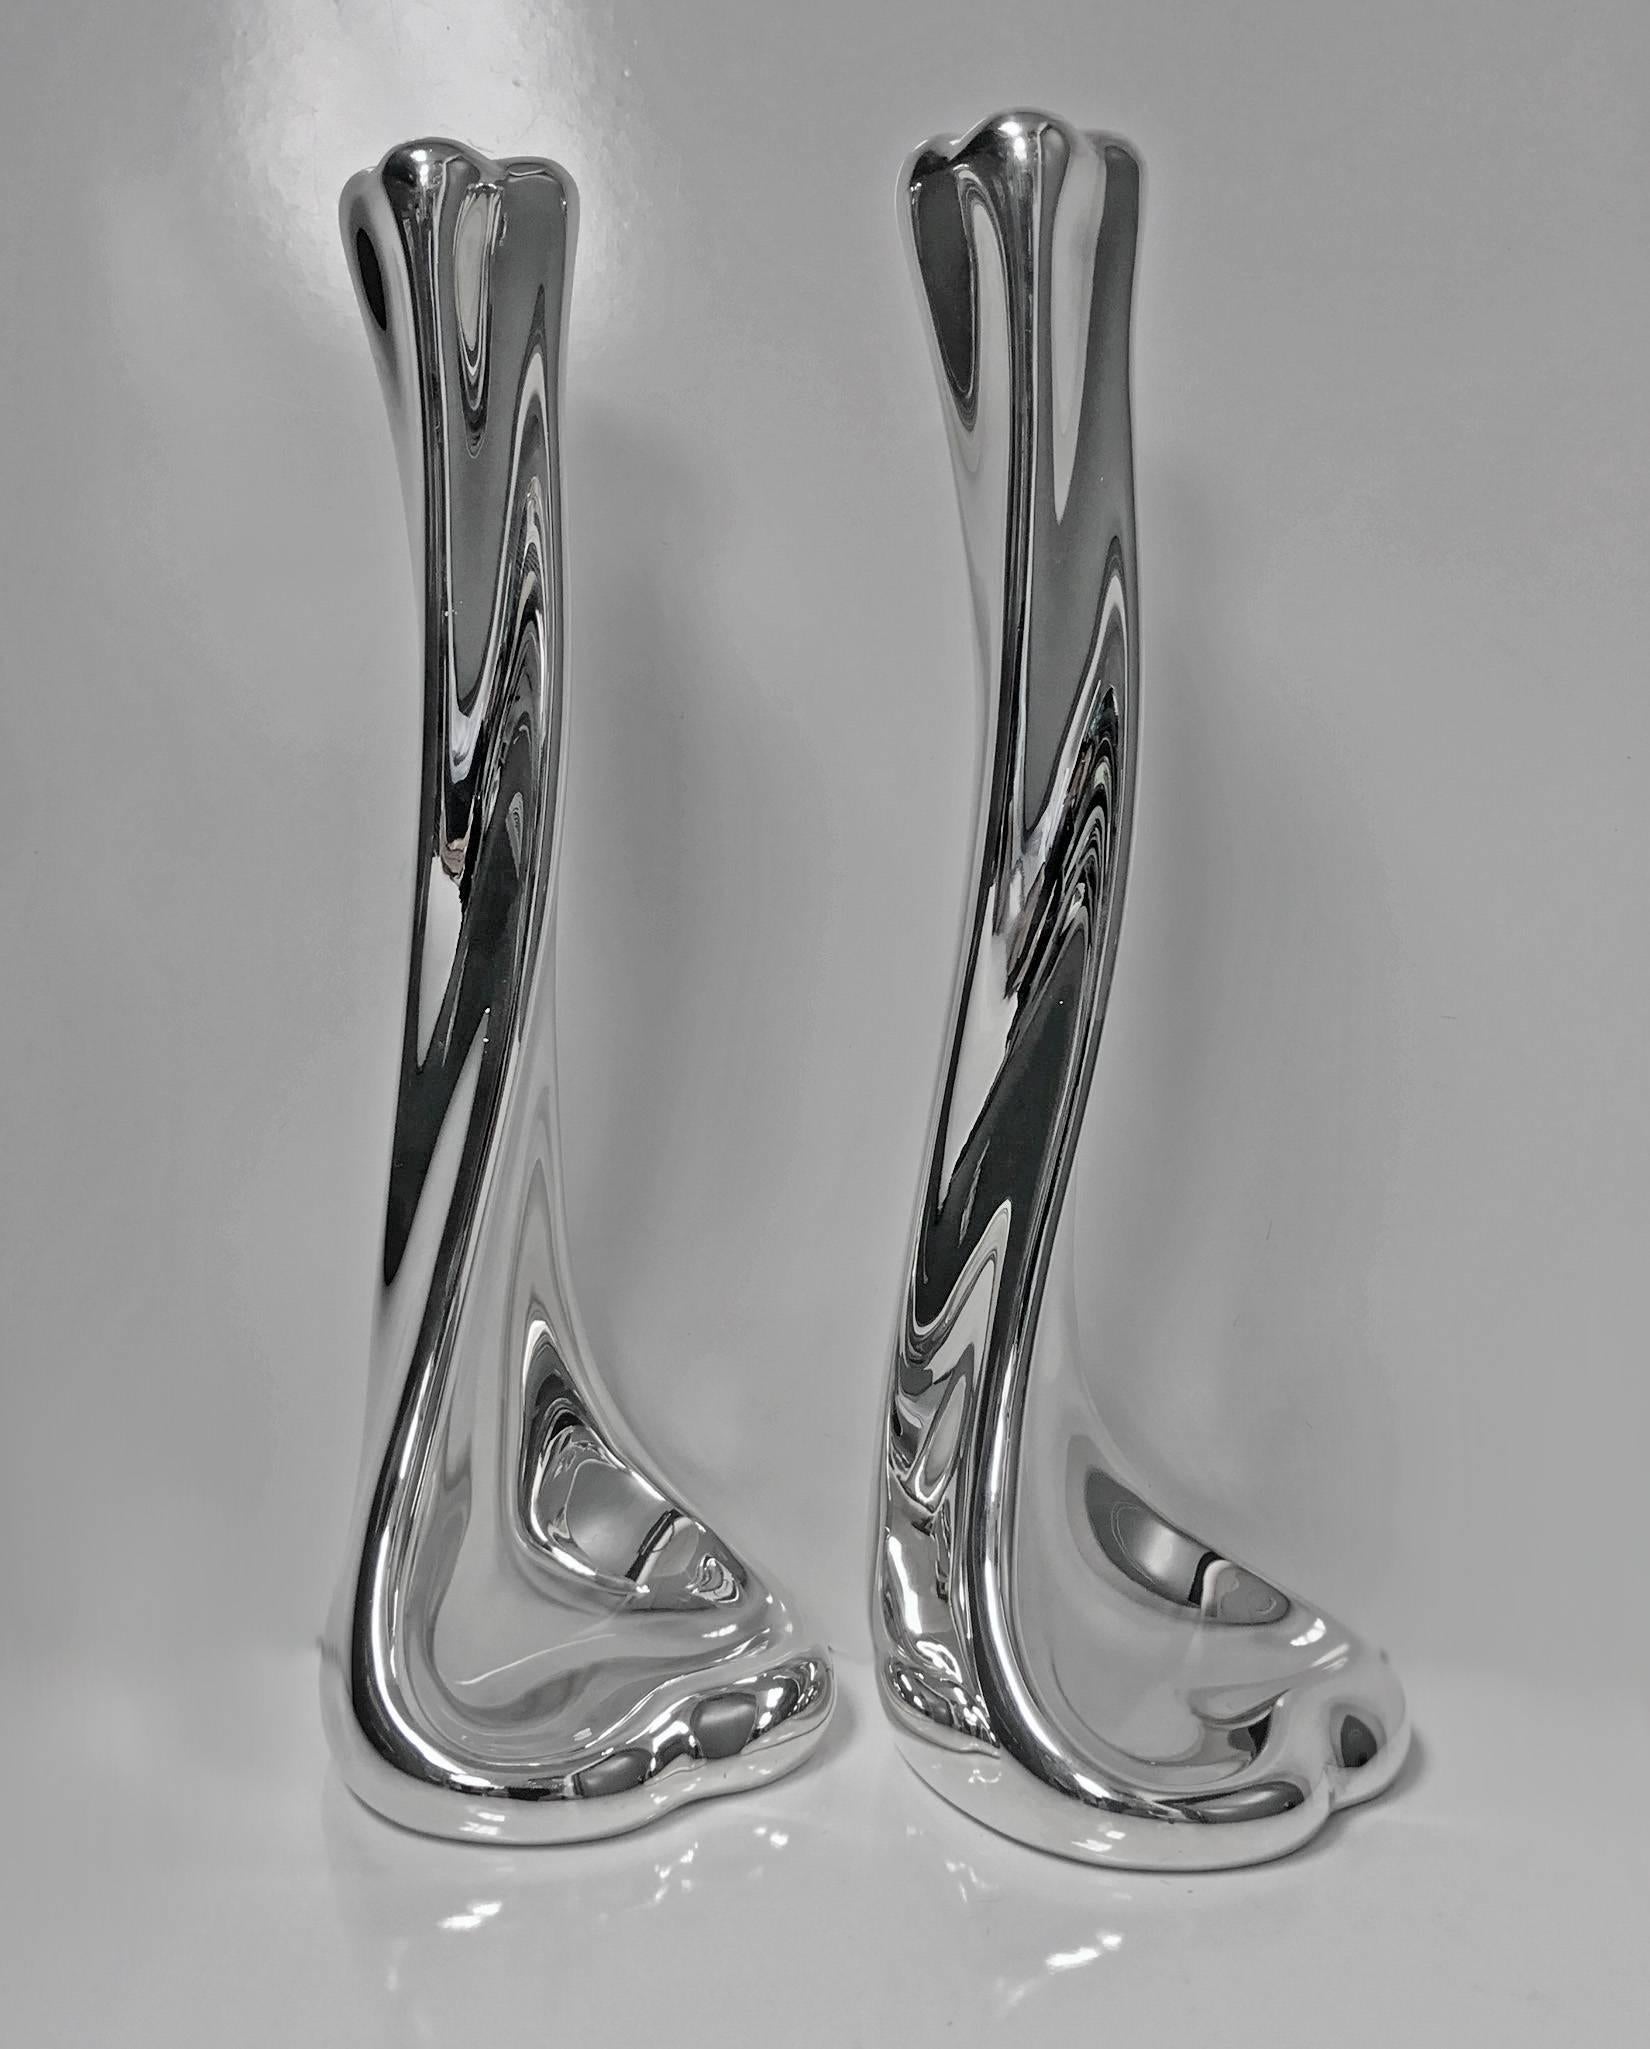 Pair of Tiffany Sterling Elsa Perreti design sterling bone candlesticks. Measures: Height: 9.5 inches. Weight: 668 grams.